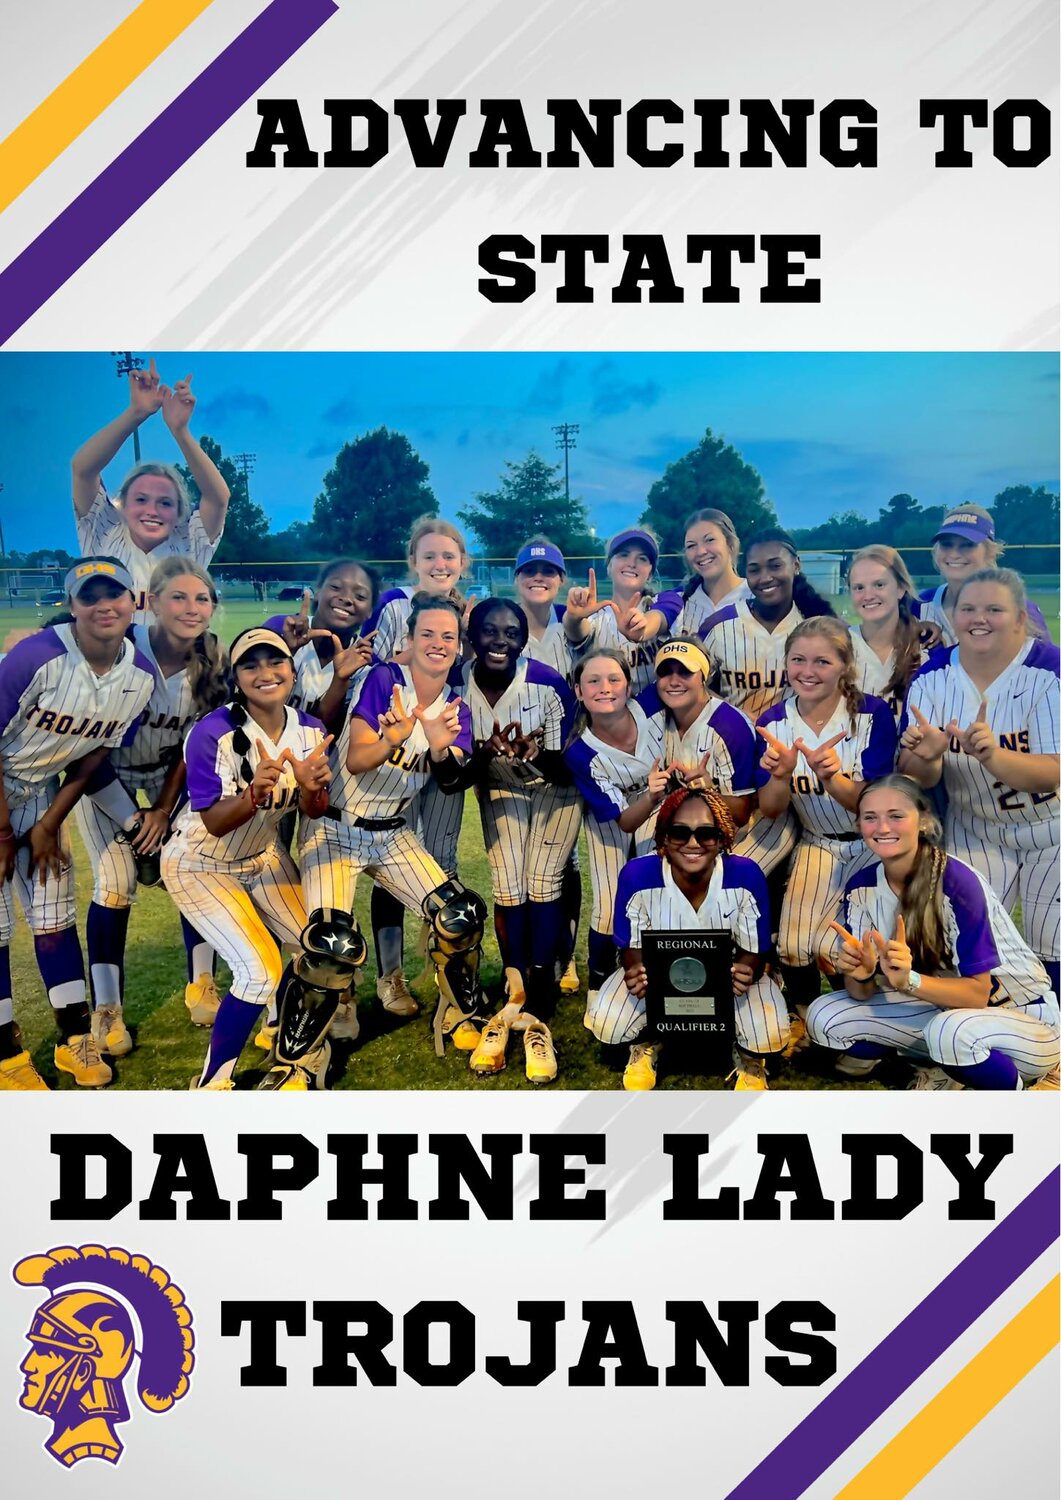 The state championship bracket for Class 7A will include the Daphne Trojans after they were the South Regional runners-up in Gulf Shores last weekend. Daphne will be joined by Fairhope, Spanish Fort and Orange Beach in competing for the Blue Map Trophy in Jacksonville this weekend.